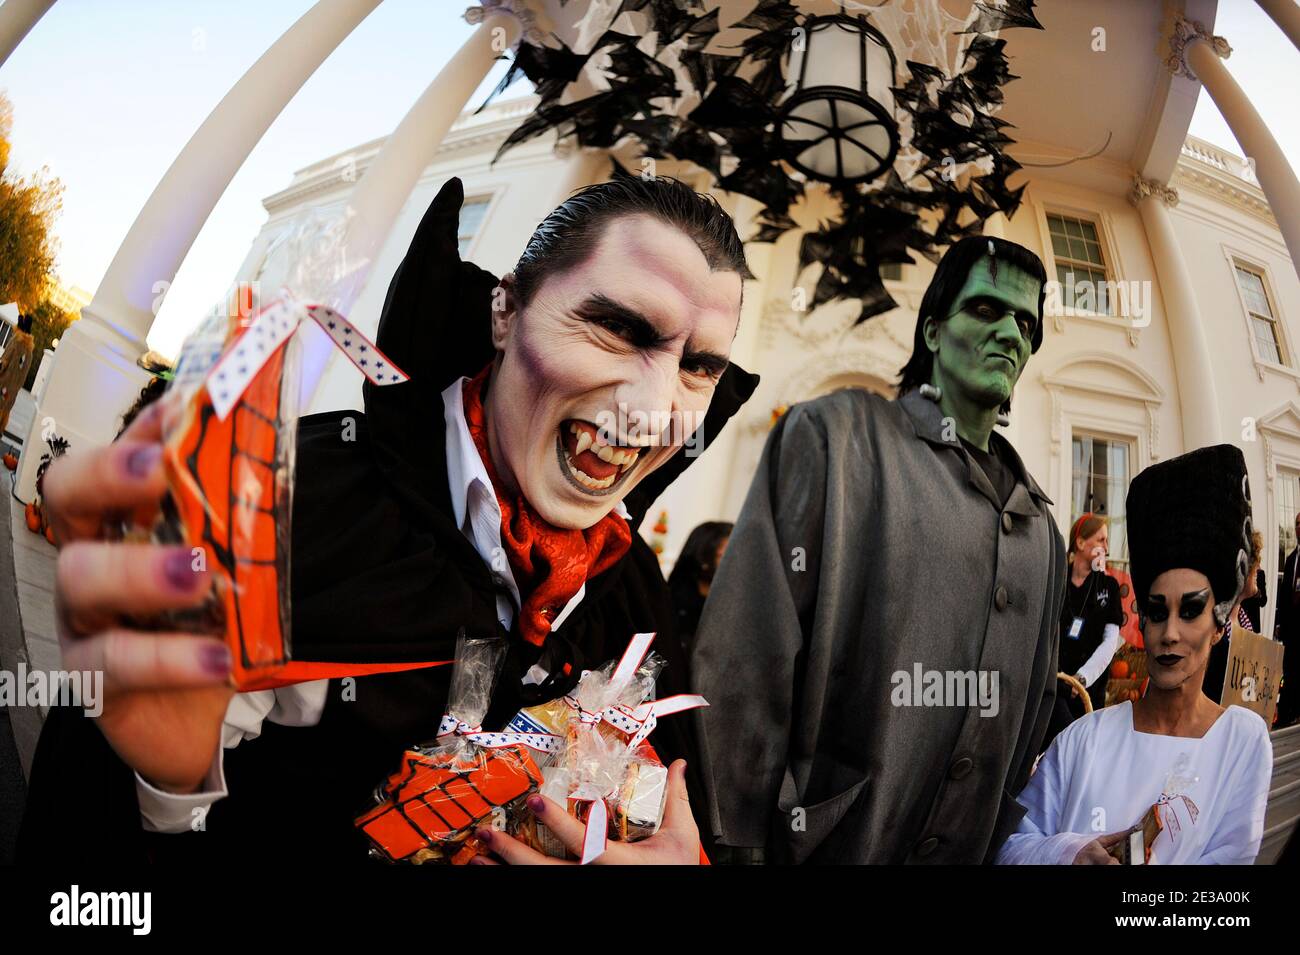 Monsters distribute candys for Halloween as people gather at the North Portico of the White House, in Washington, DC, USA on October 31, 2010. US President Barack Obama and First Lady Michelle Obama will greet trick or treaters at the North Portico of the White House to celebrate Halloween. Photo by Olivier Douliery/ABACAPRESS.COM Stock Photo